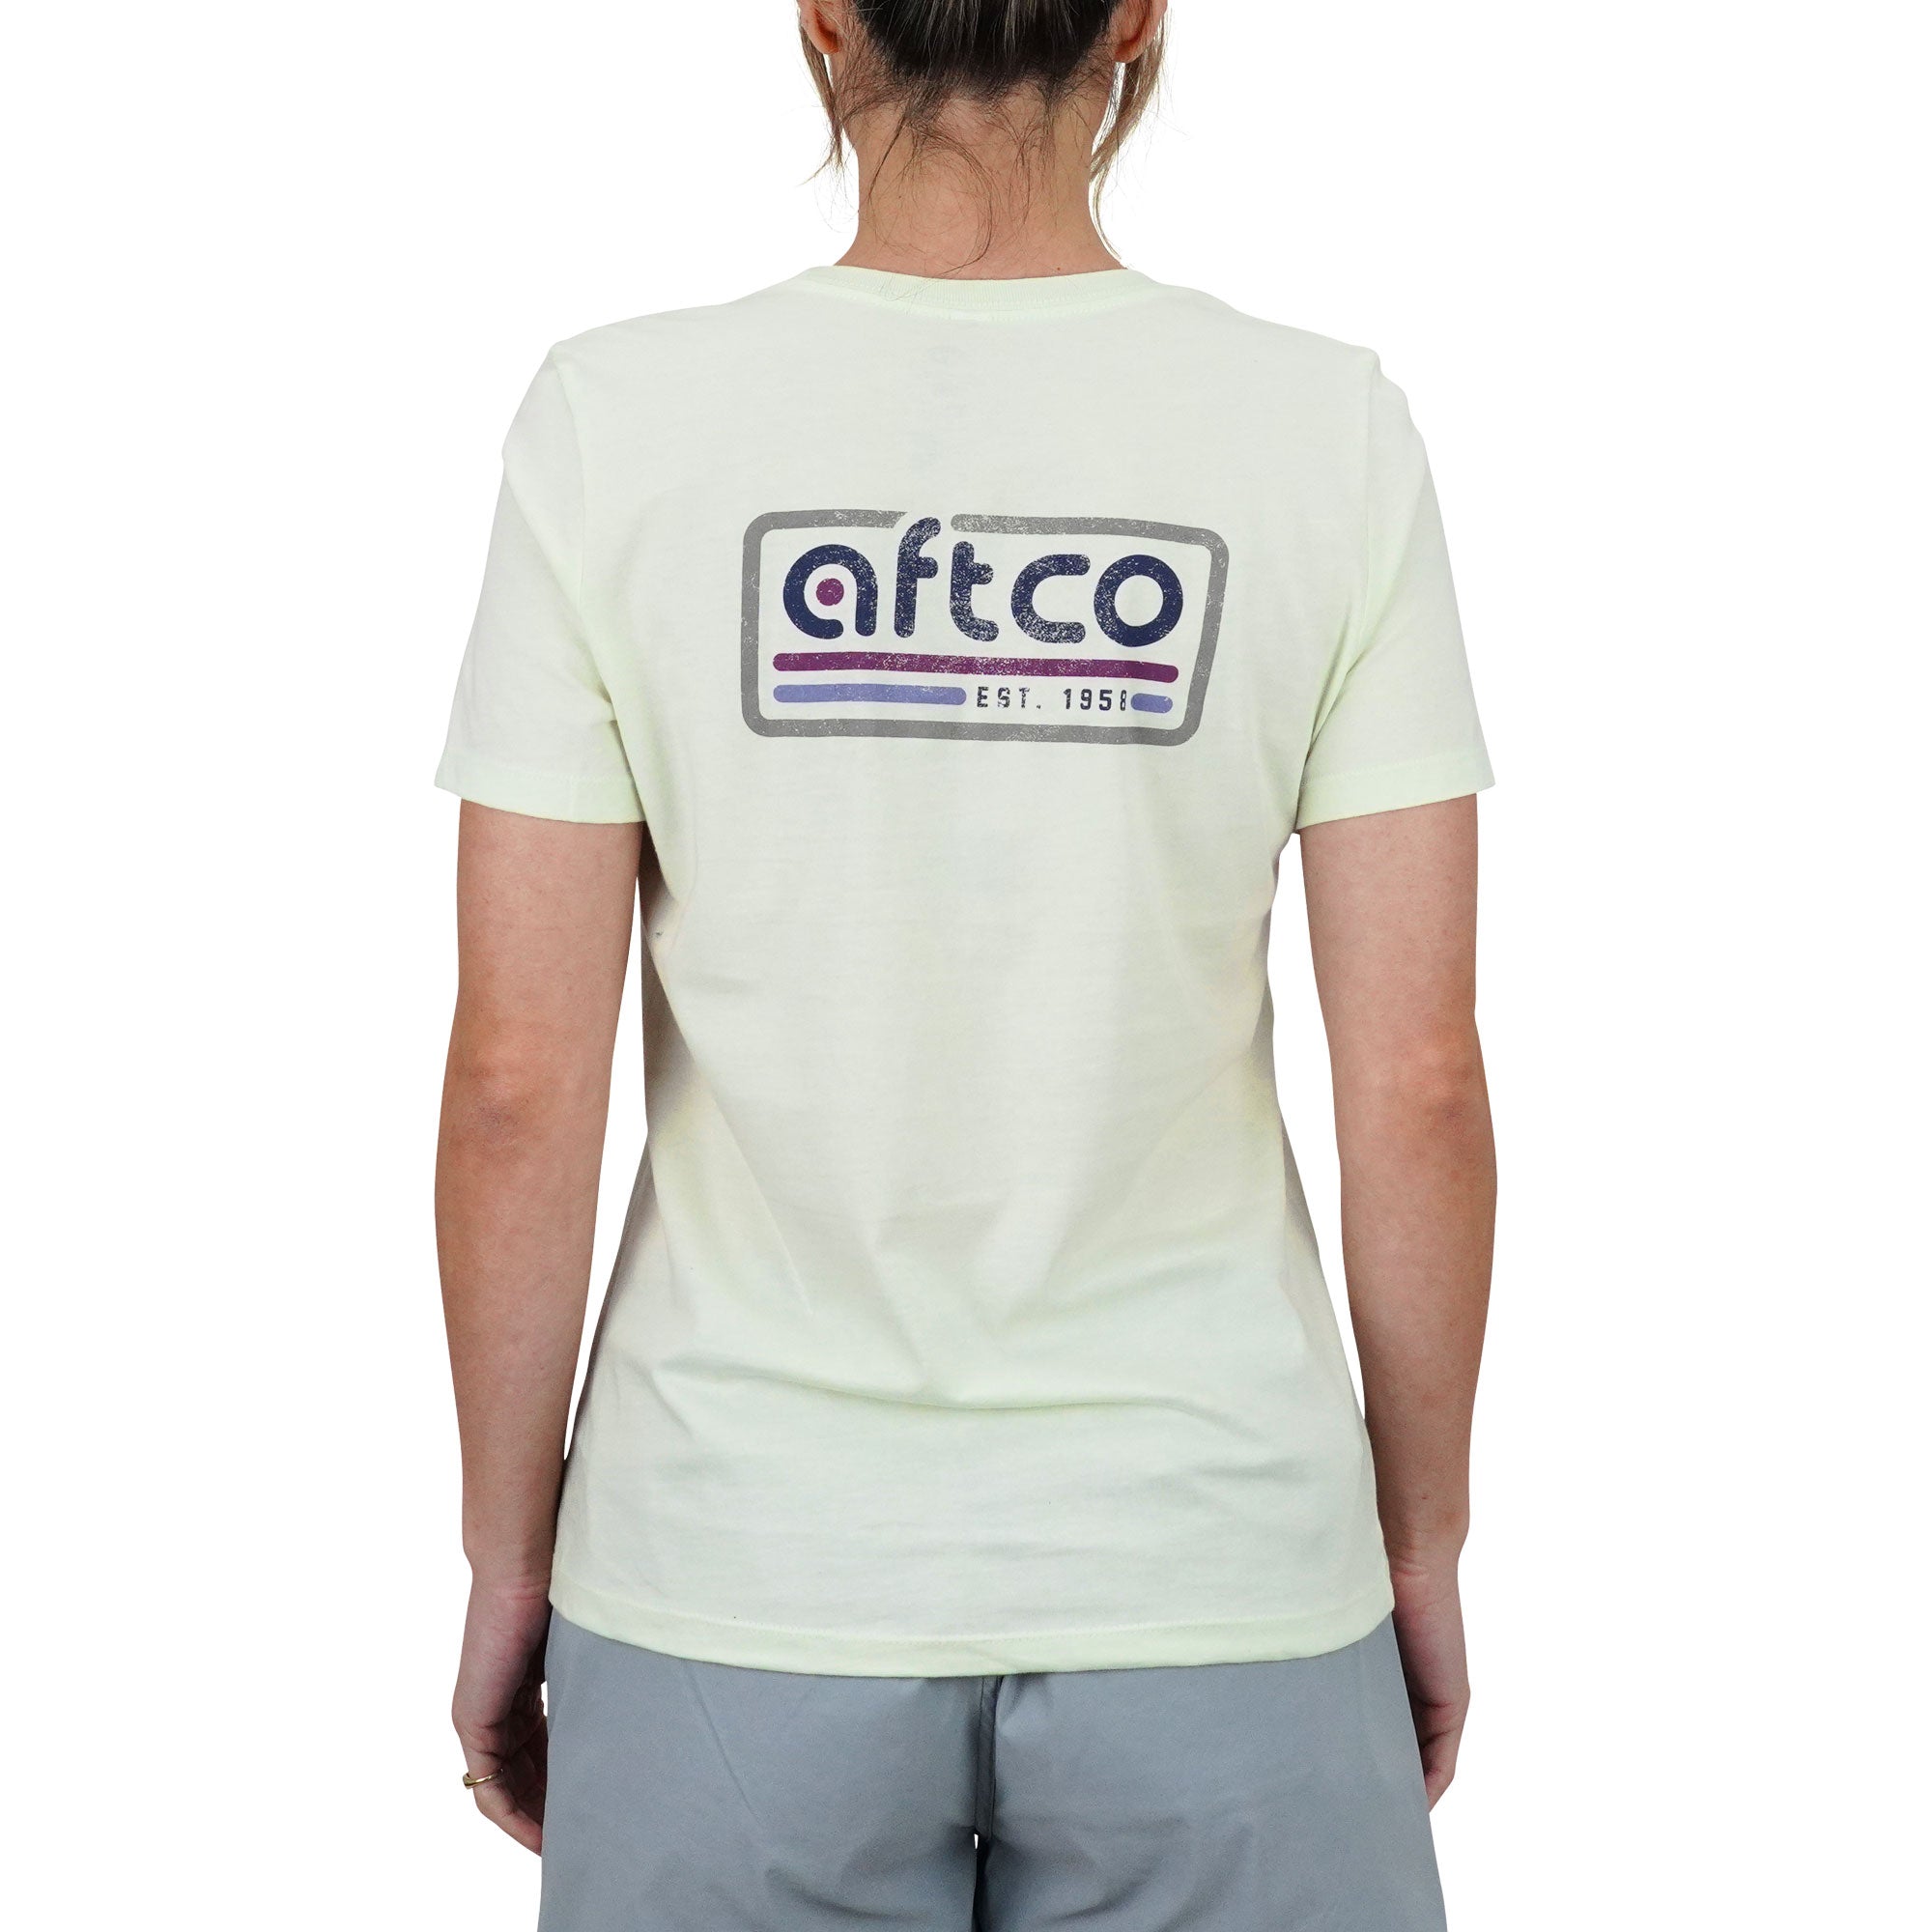 AFTCO Women's Fade SS T-Shirt - Key Lime - XL